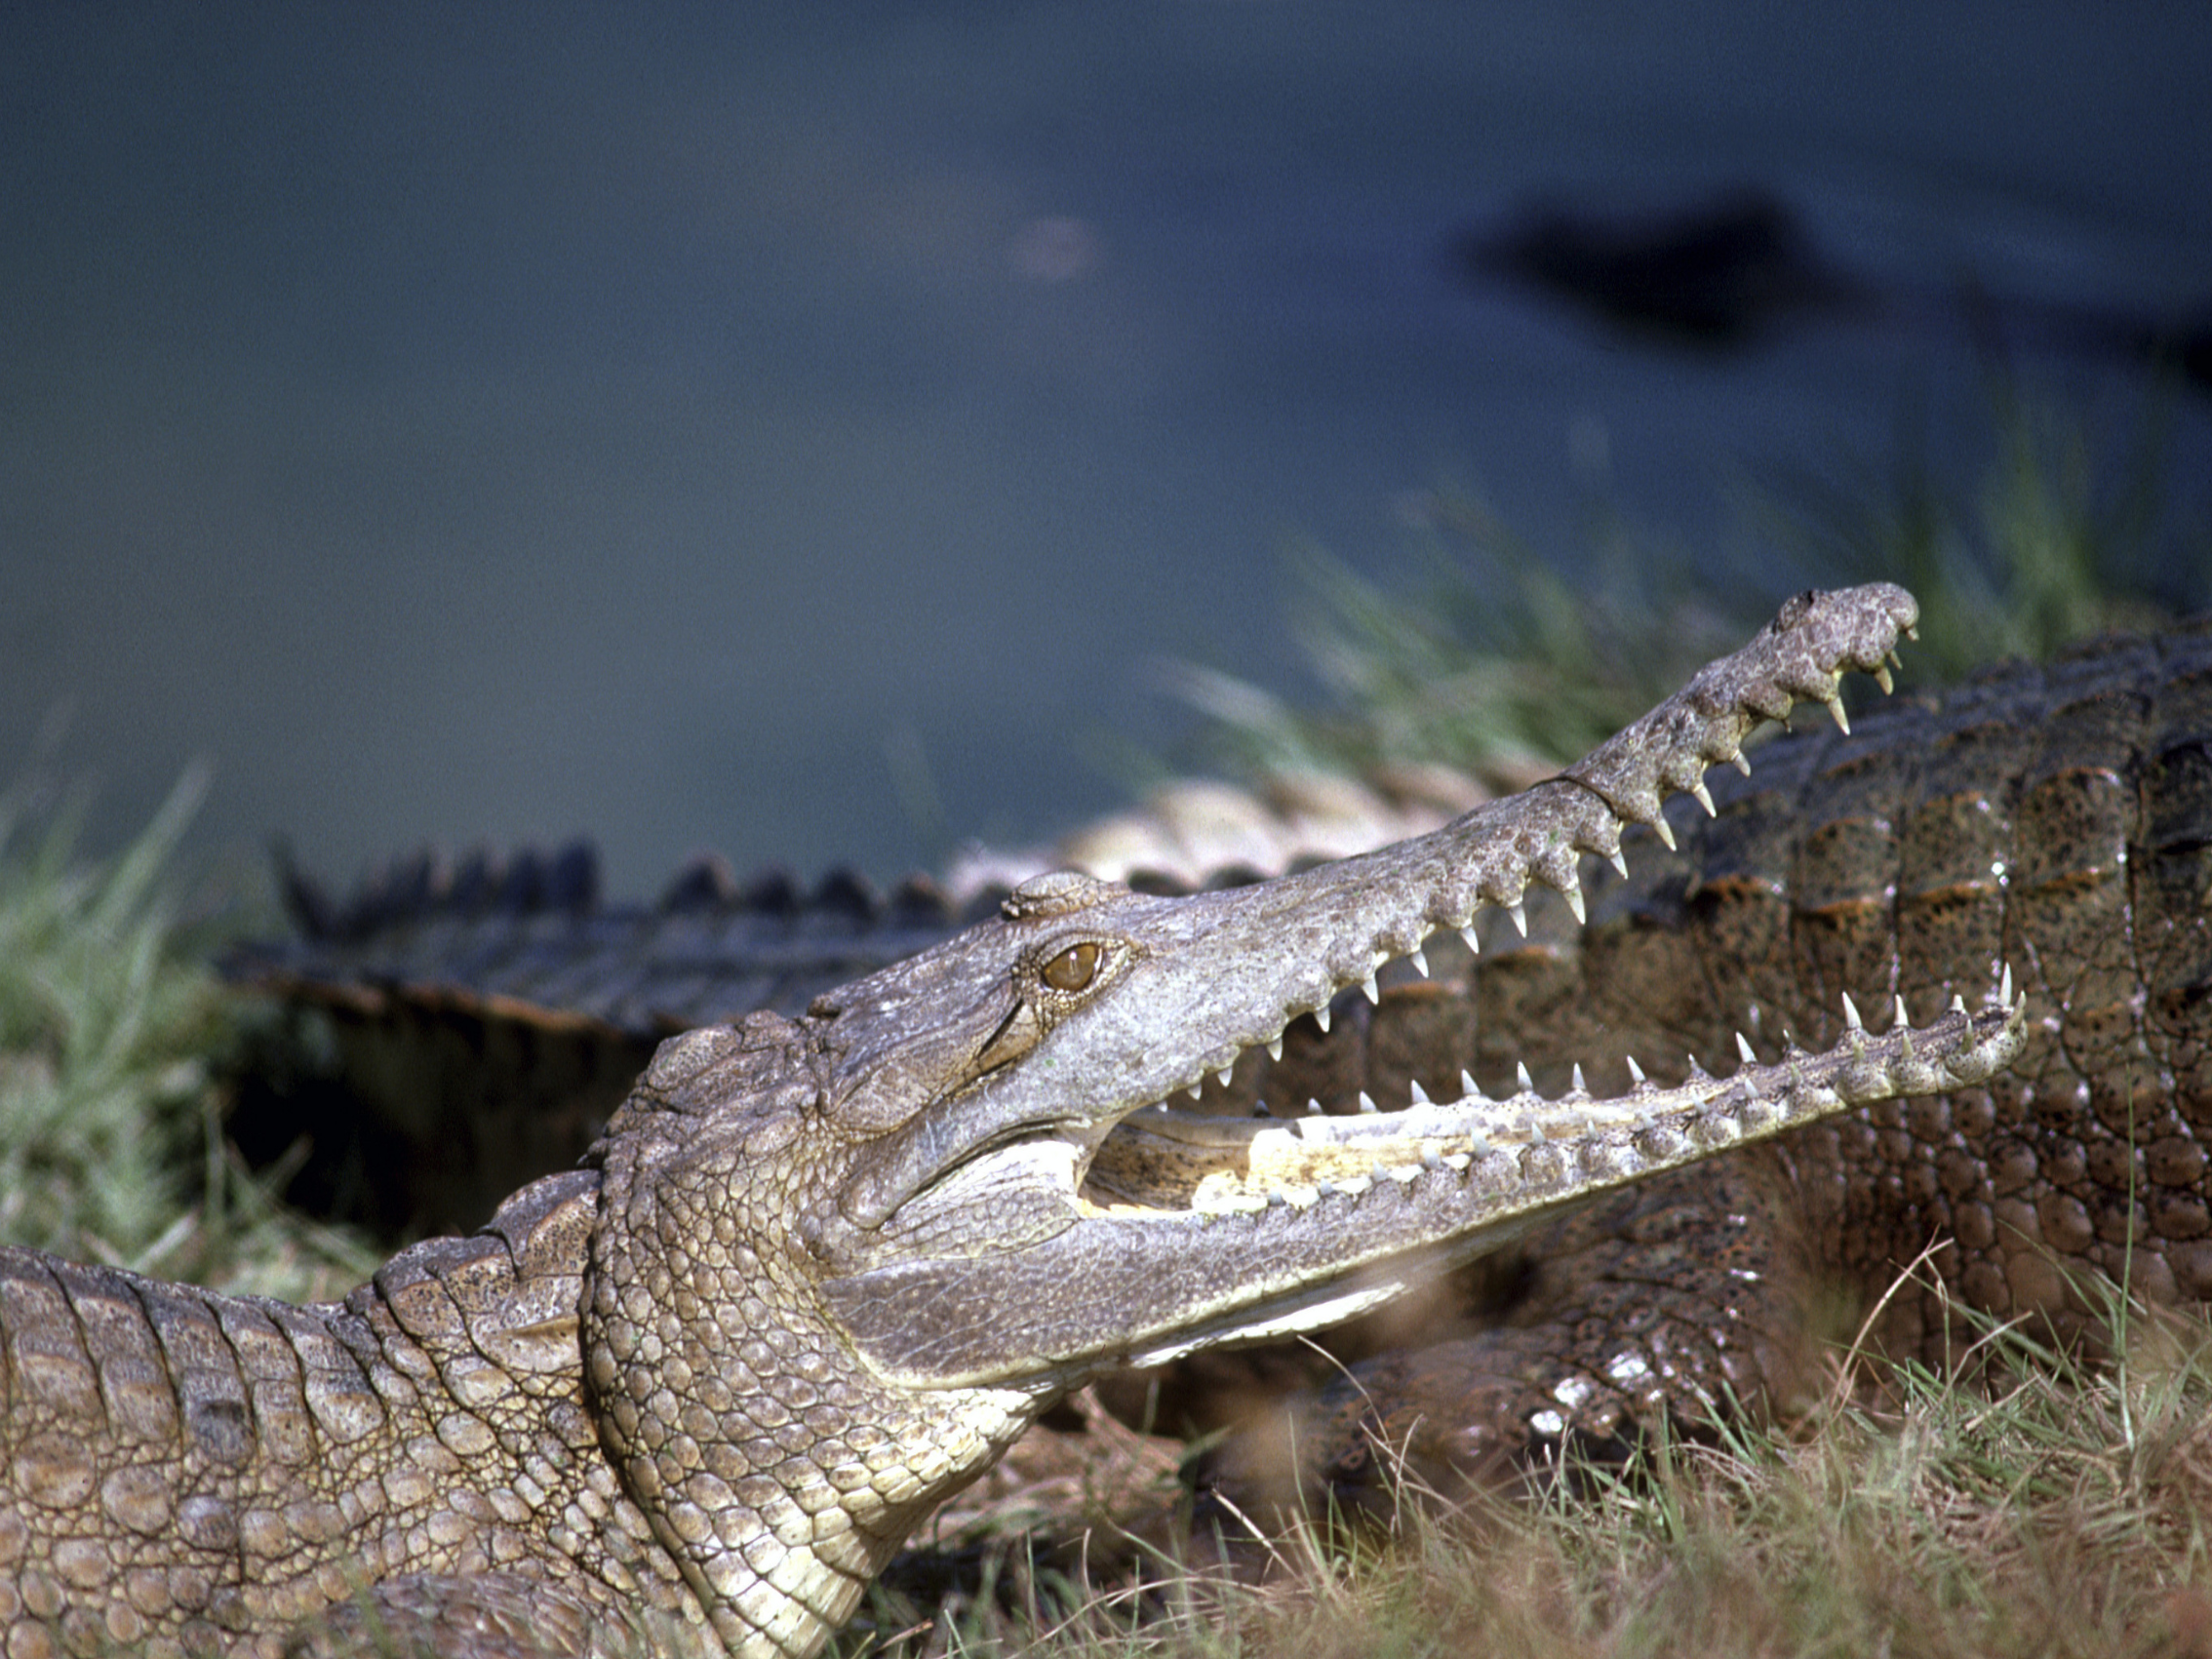 Image shows a freshwater crocodile with its mouth open displaying its sharp teeth.